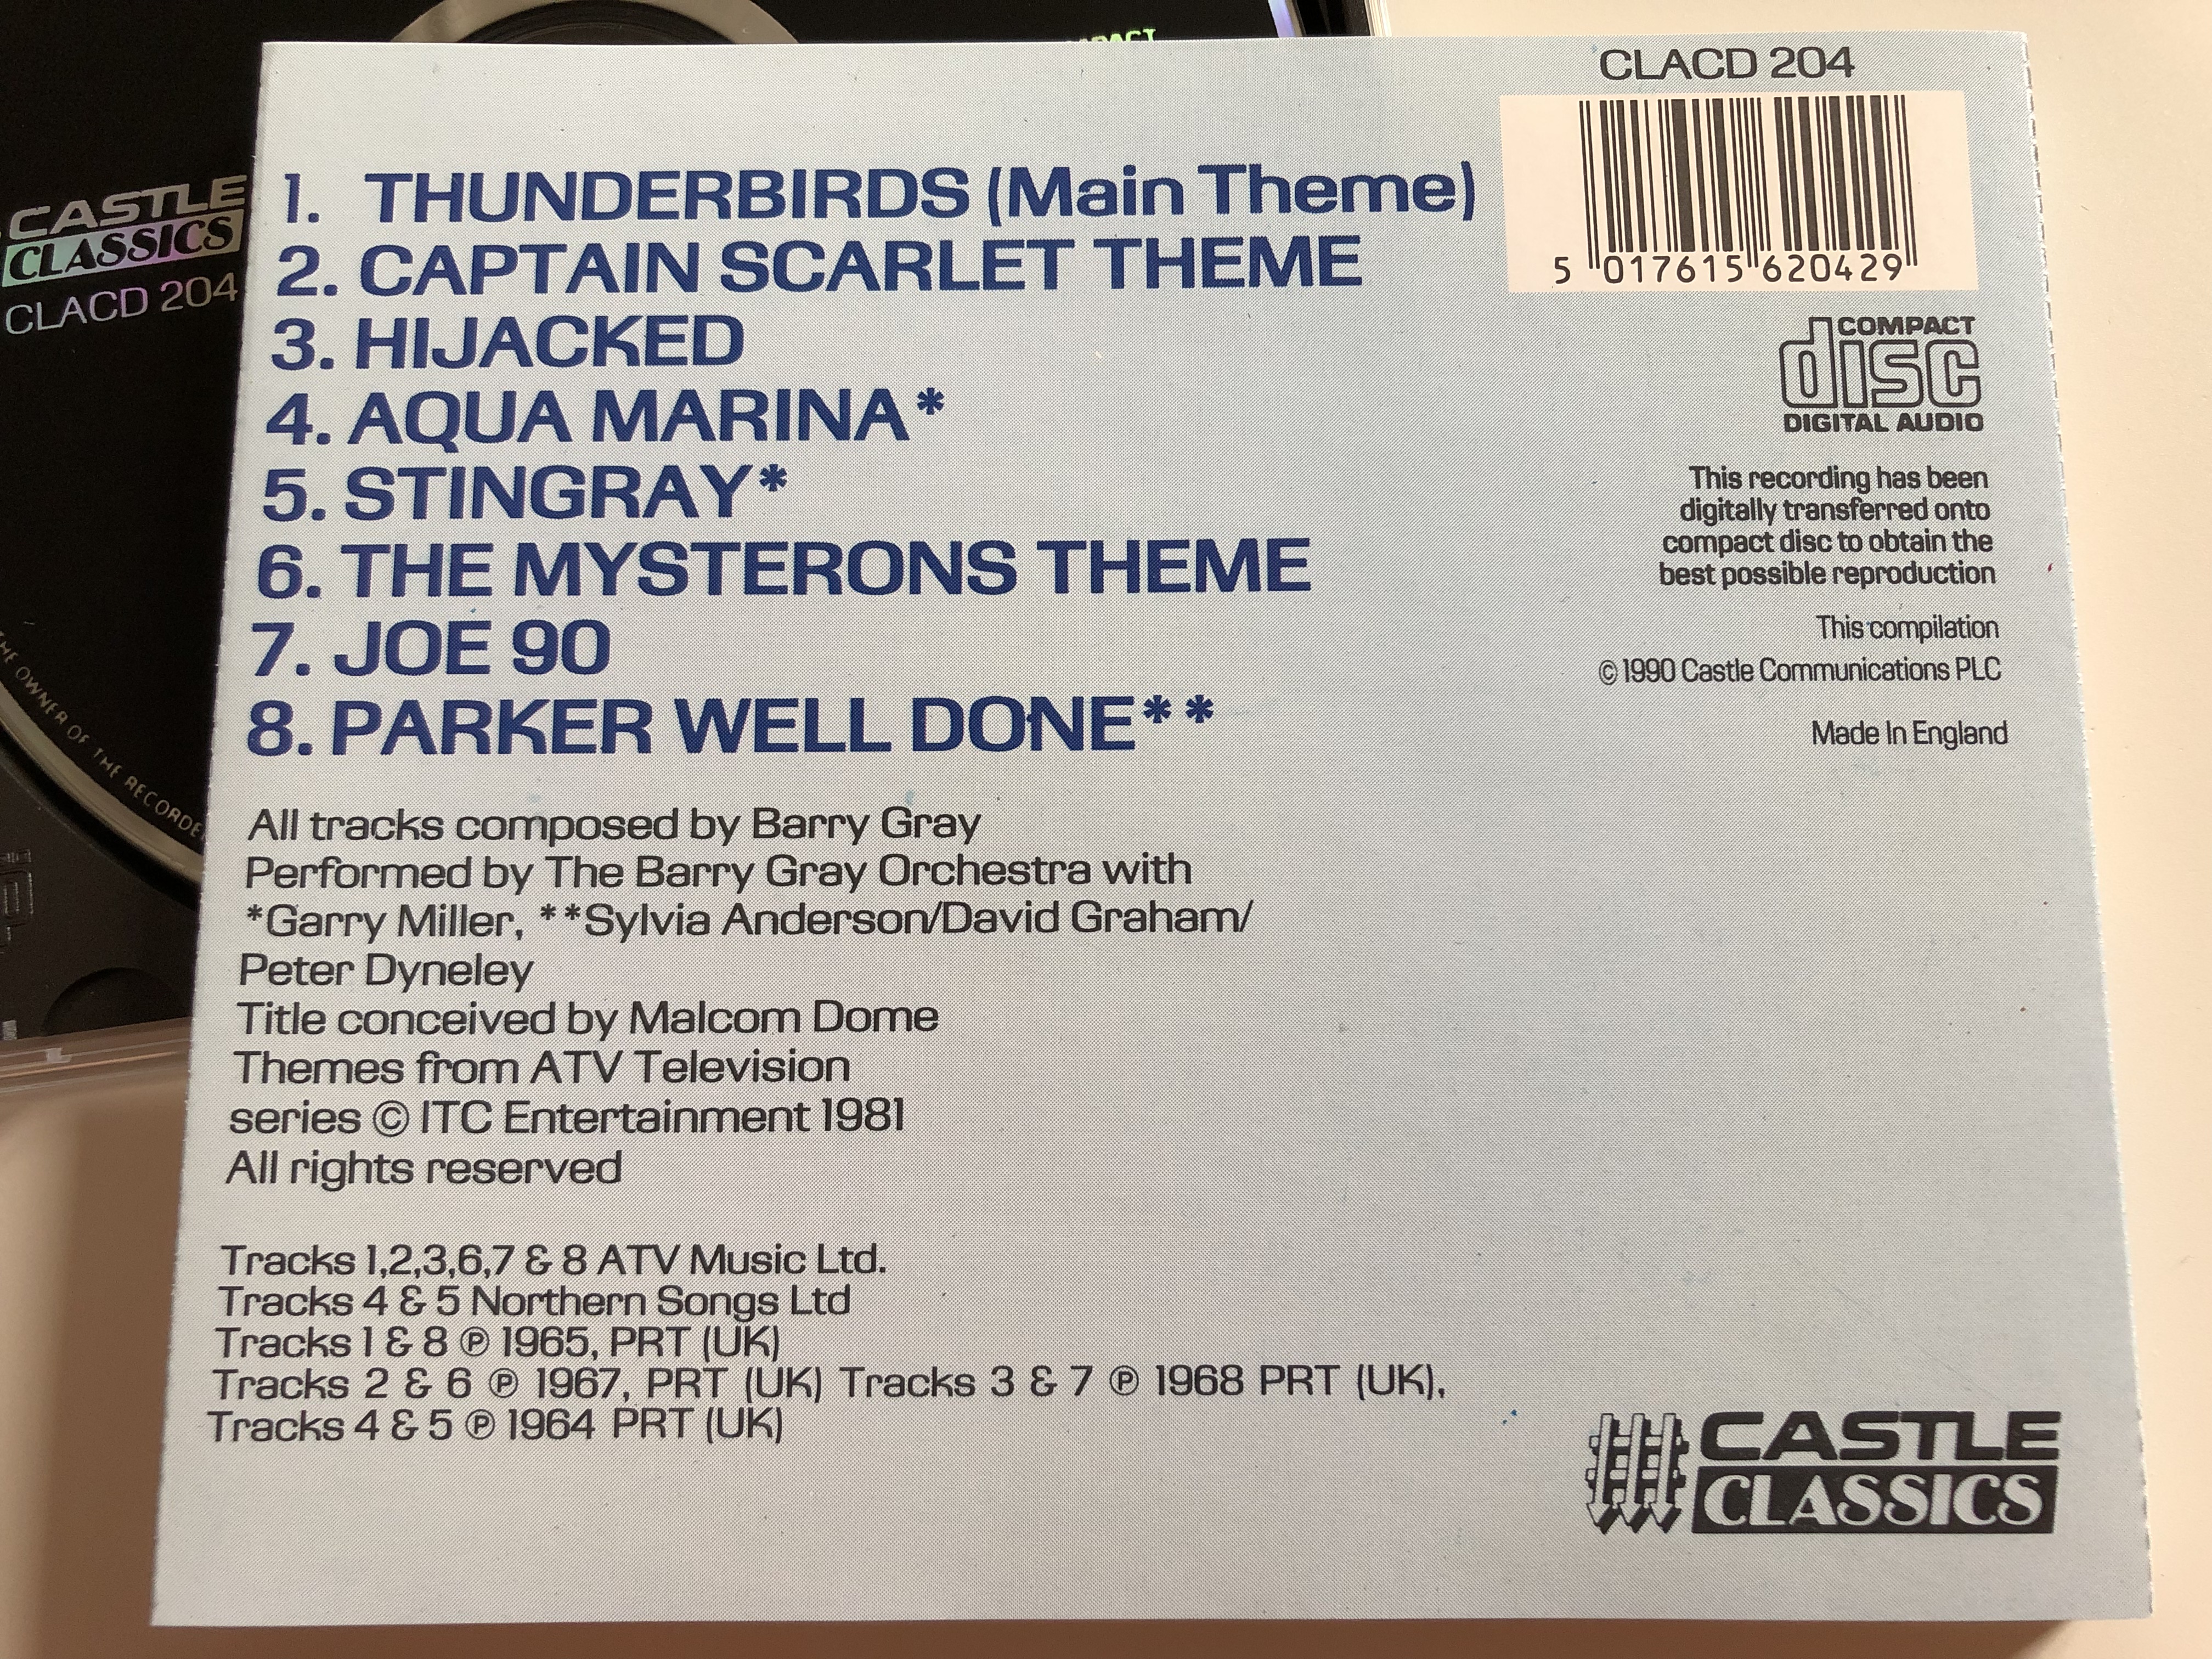 no-strings-attached-featuring-thunderbirds-captain-scarlet-the-mysterons-stringray-joe-90-the-barry-gray-orchestra-castle-classics-audio-cd-1990-clacd-204-4-.jpg